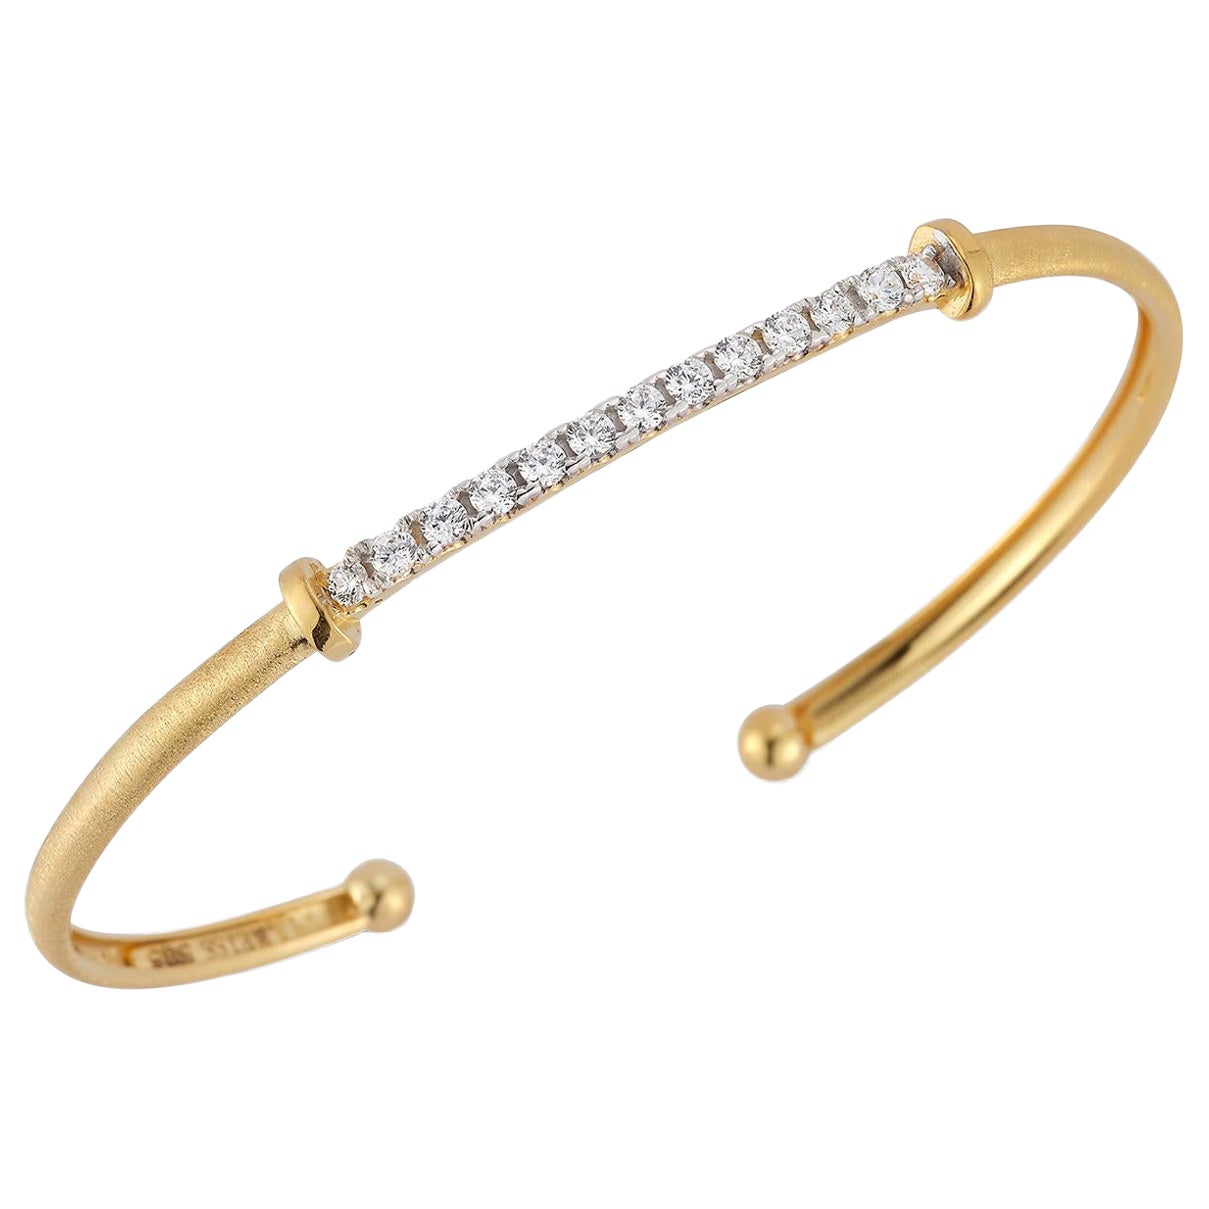 Hand-Crafted 14K Yellow Gold Flexible Bangle Bracelet.